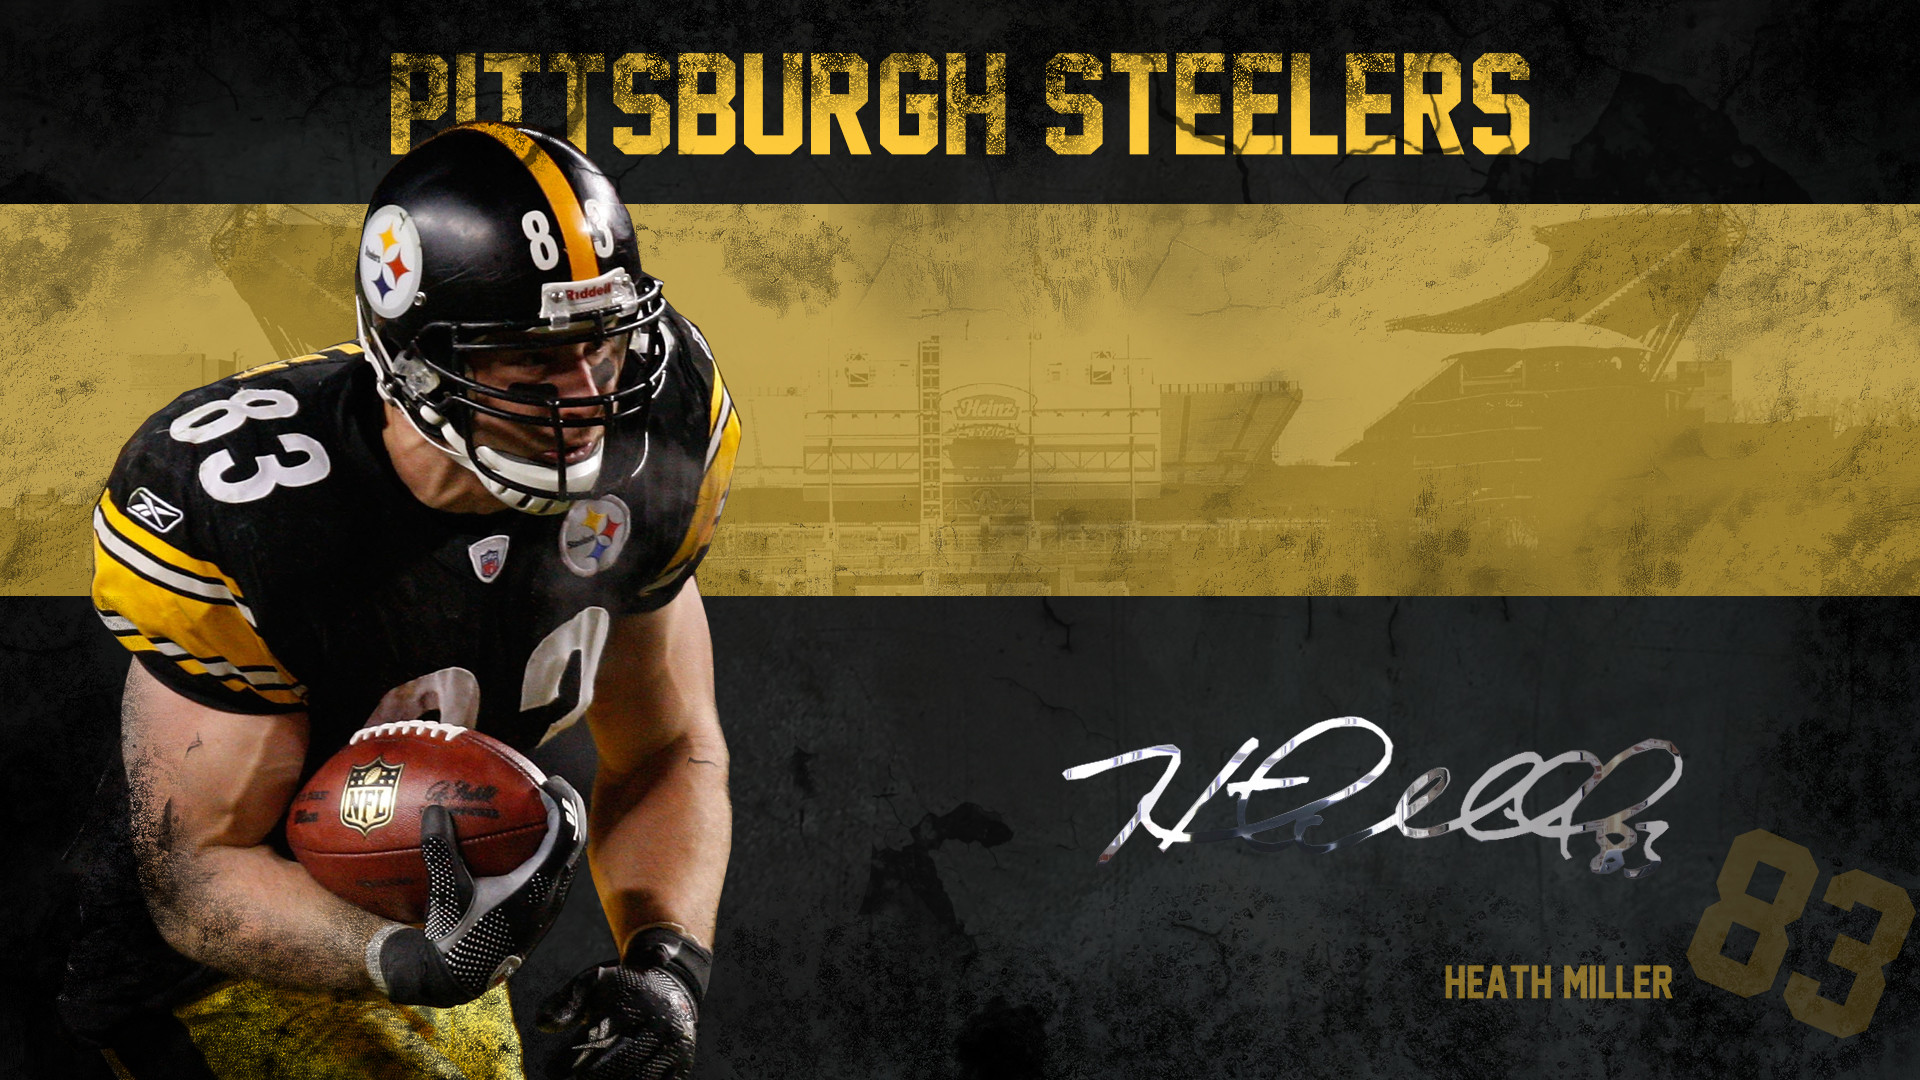 1920x1080 Pittsburgh Steelers images Heath Miller Wallpaper HD wallpaper and  background photos